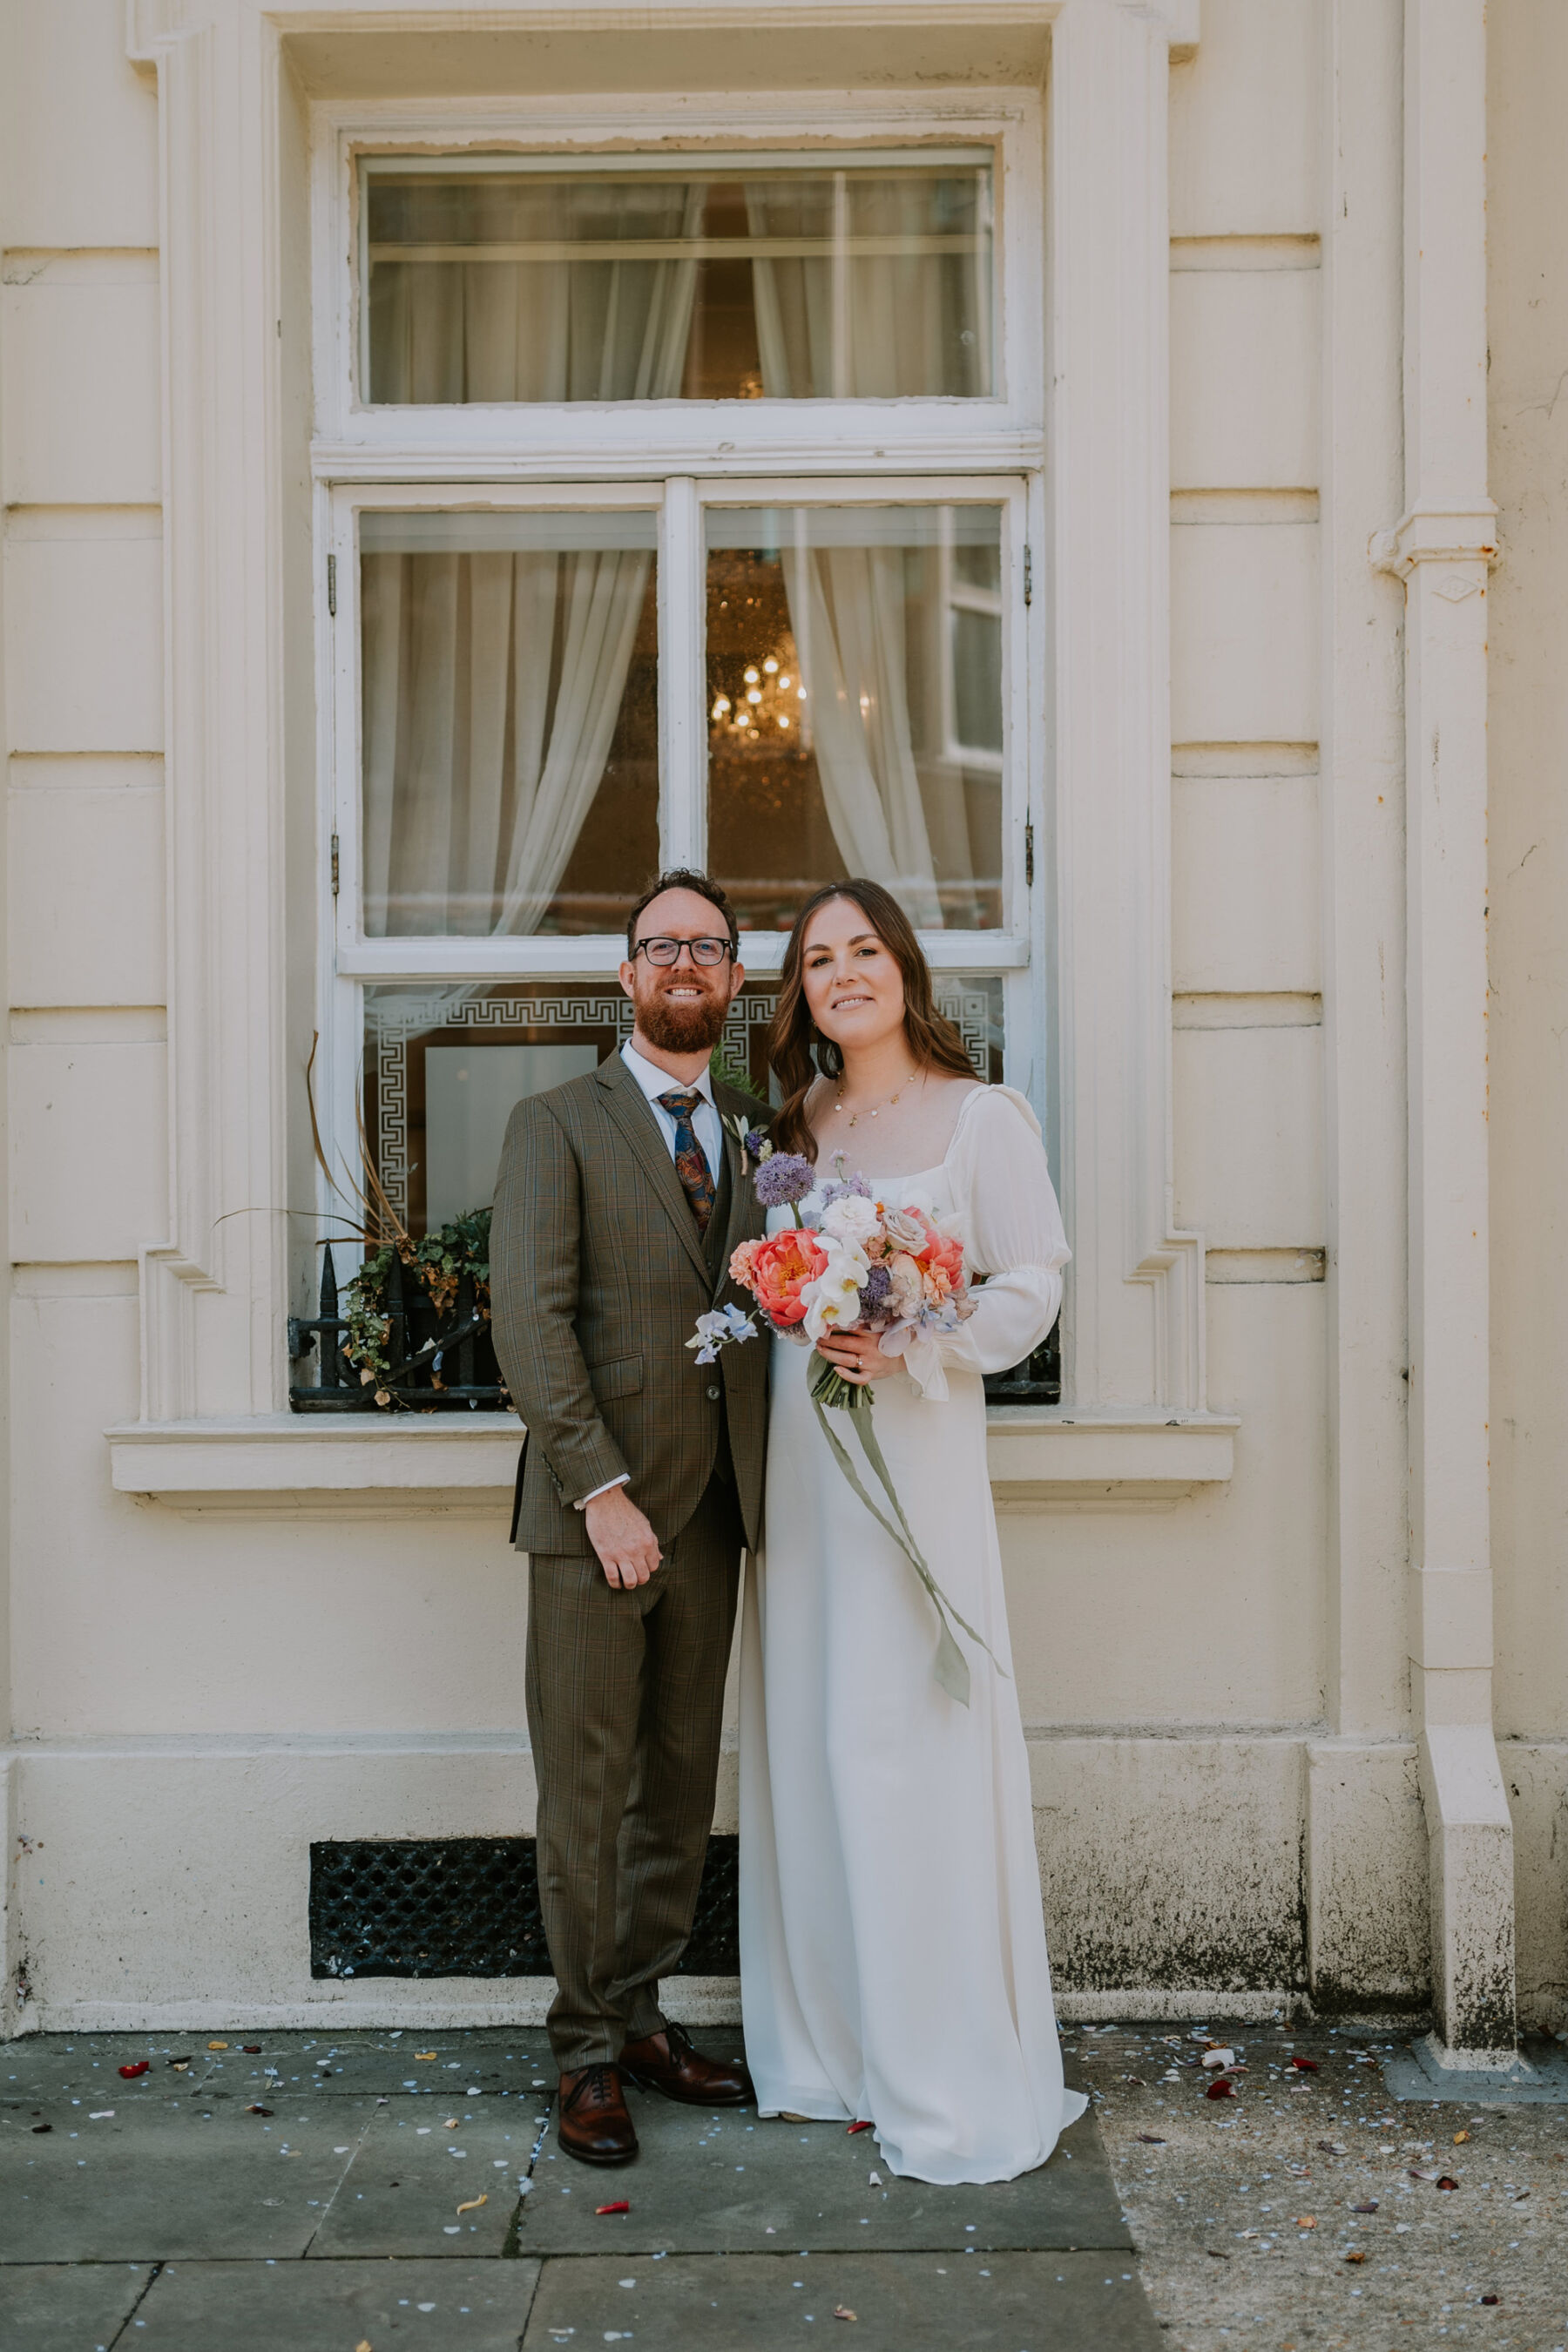 Bride wearing a Reformation wedding dress & carrying a colourful bouquet.